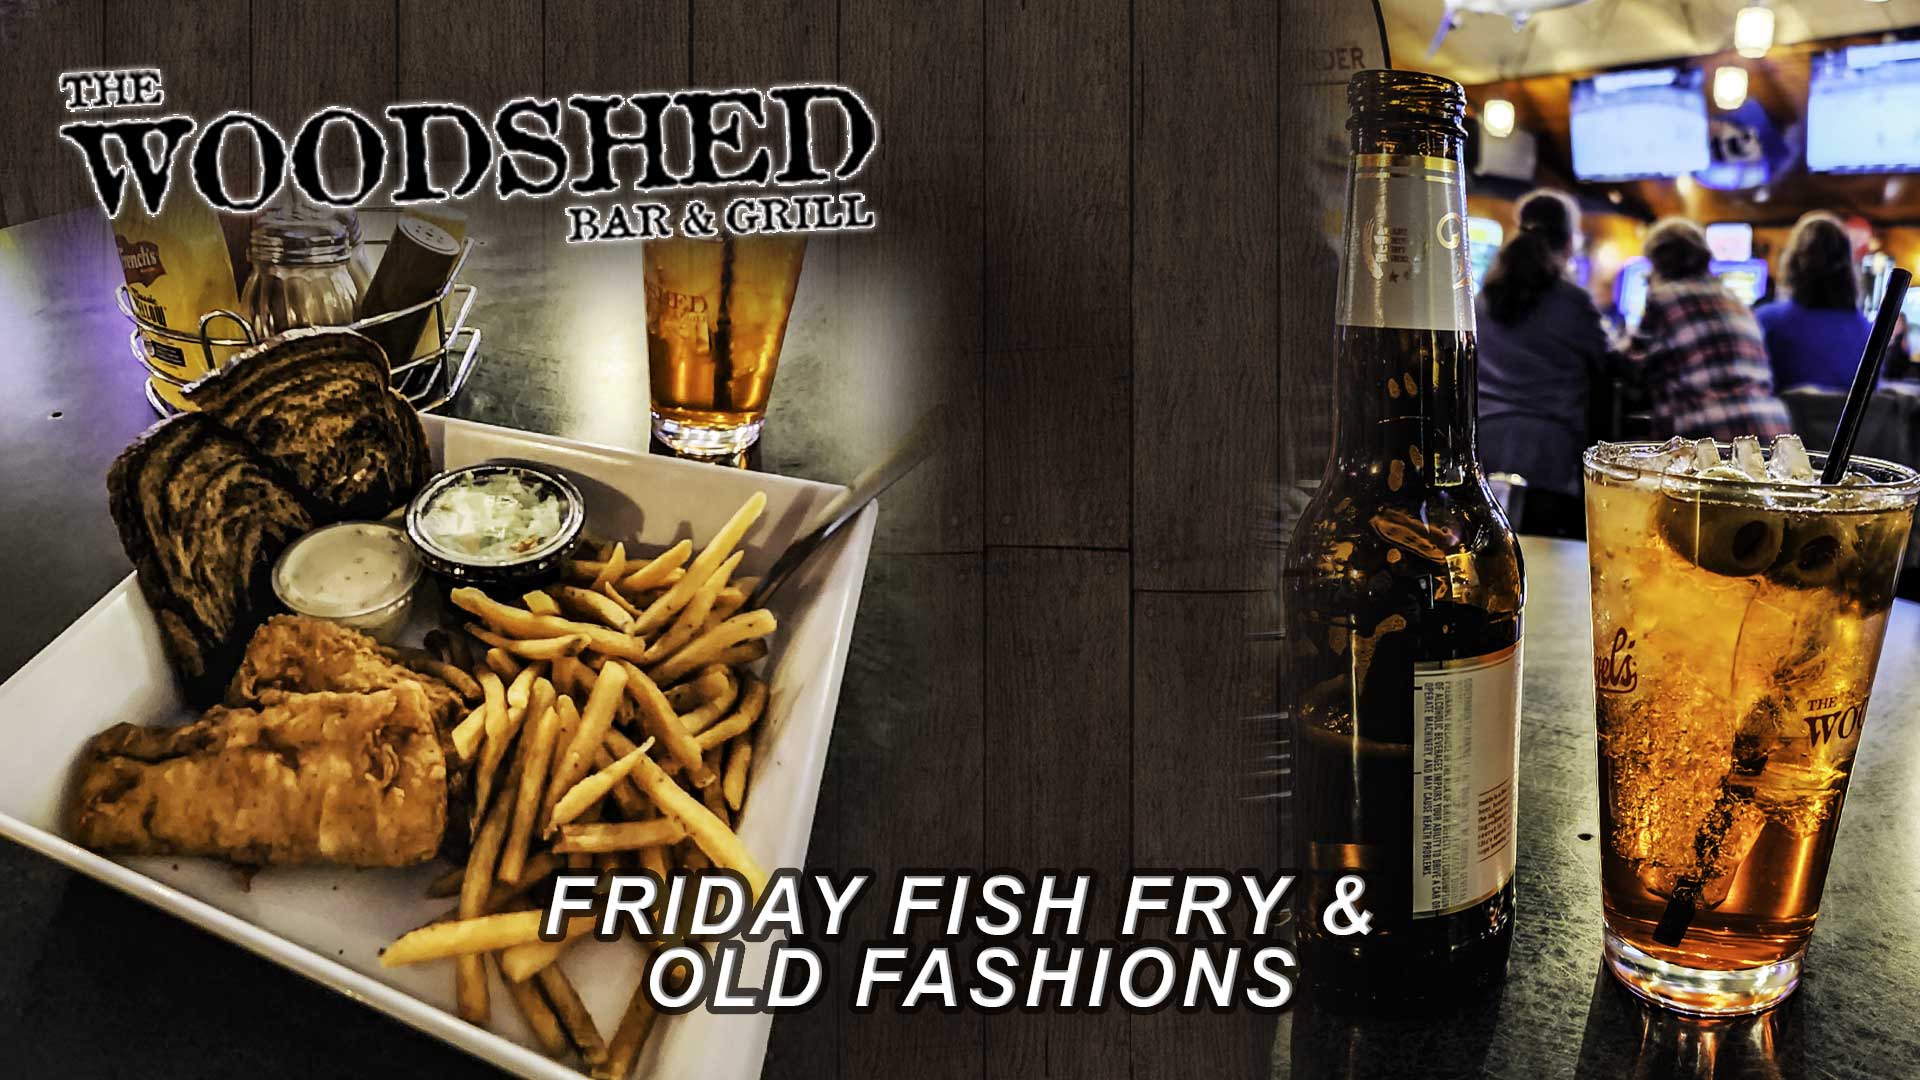 Woodshed Bar & Grill Friday Fish Fry Review